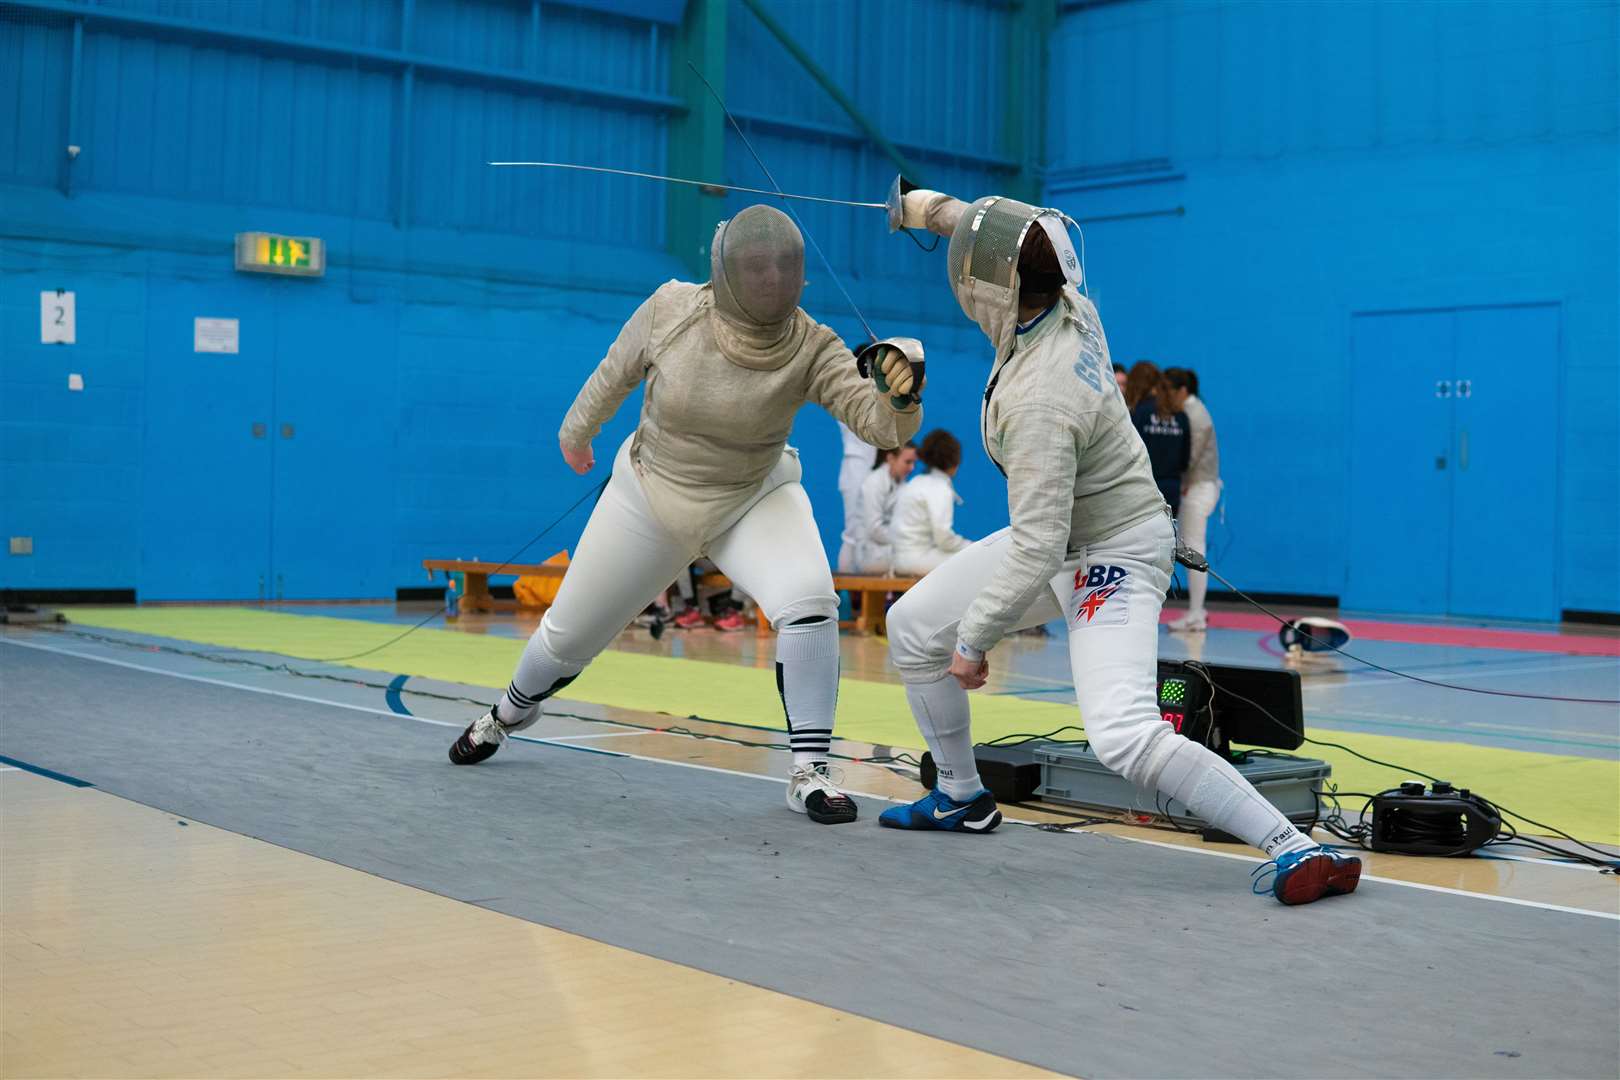 The University of Kent Fencing Club which has recently been named University Club of the Year by their National Governing Body, the British Fencing Association.